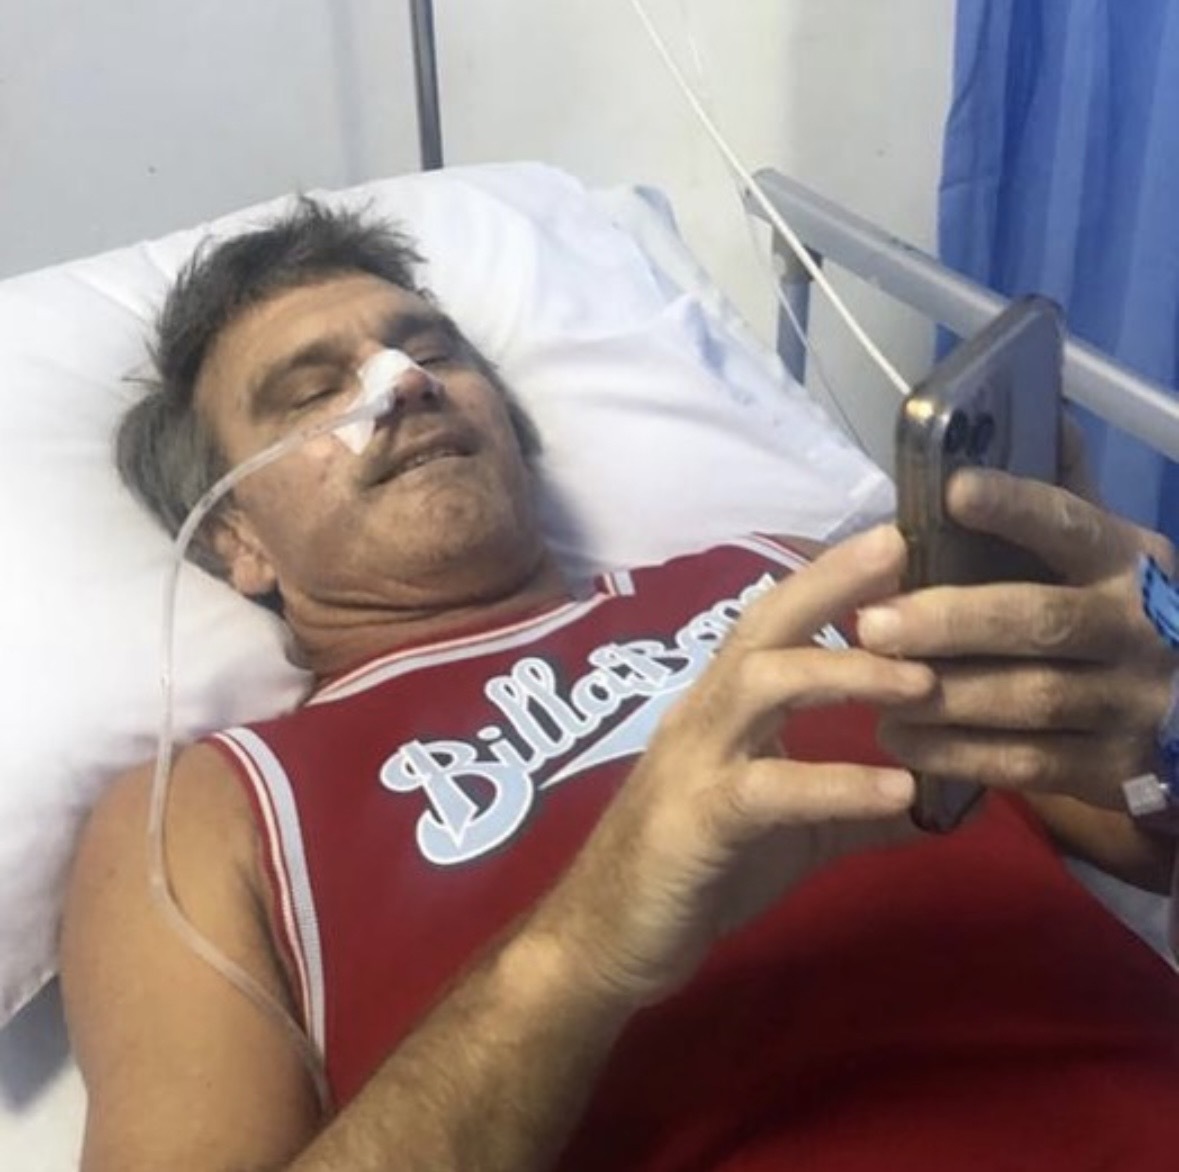 Surfing legend pleas for 'life-saving' help from Bali hospital